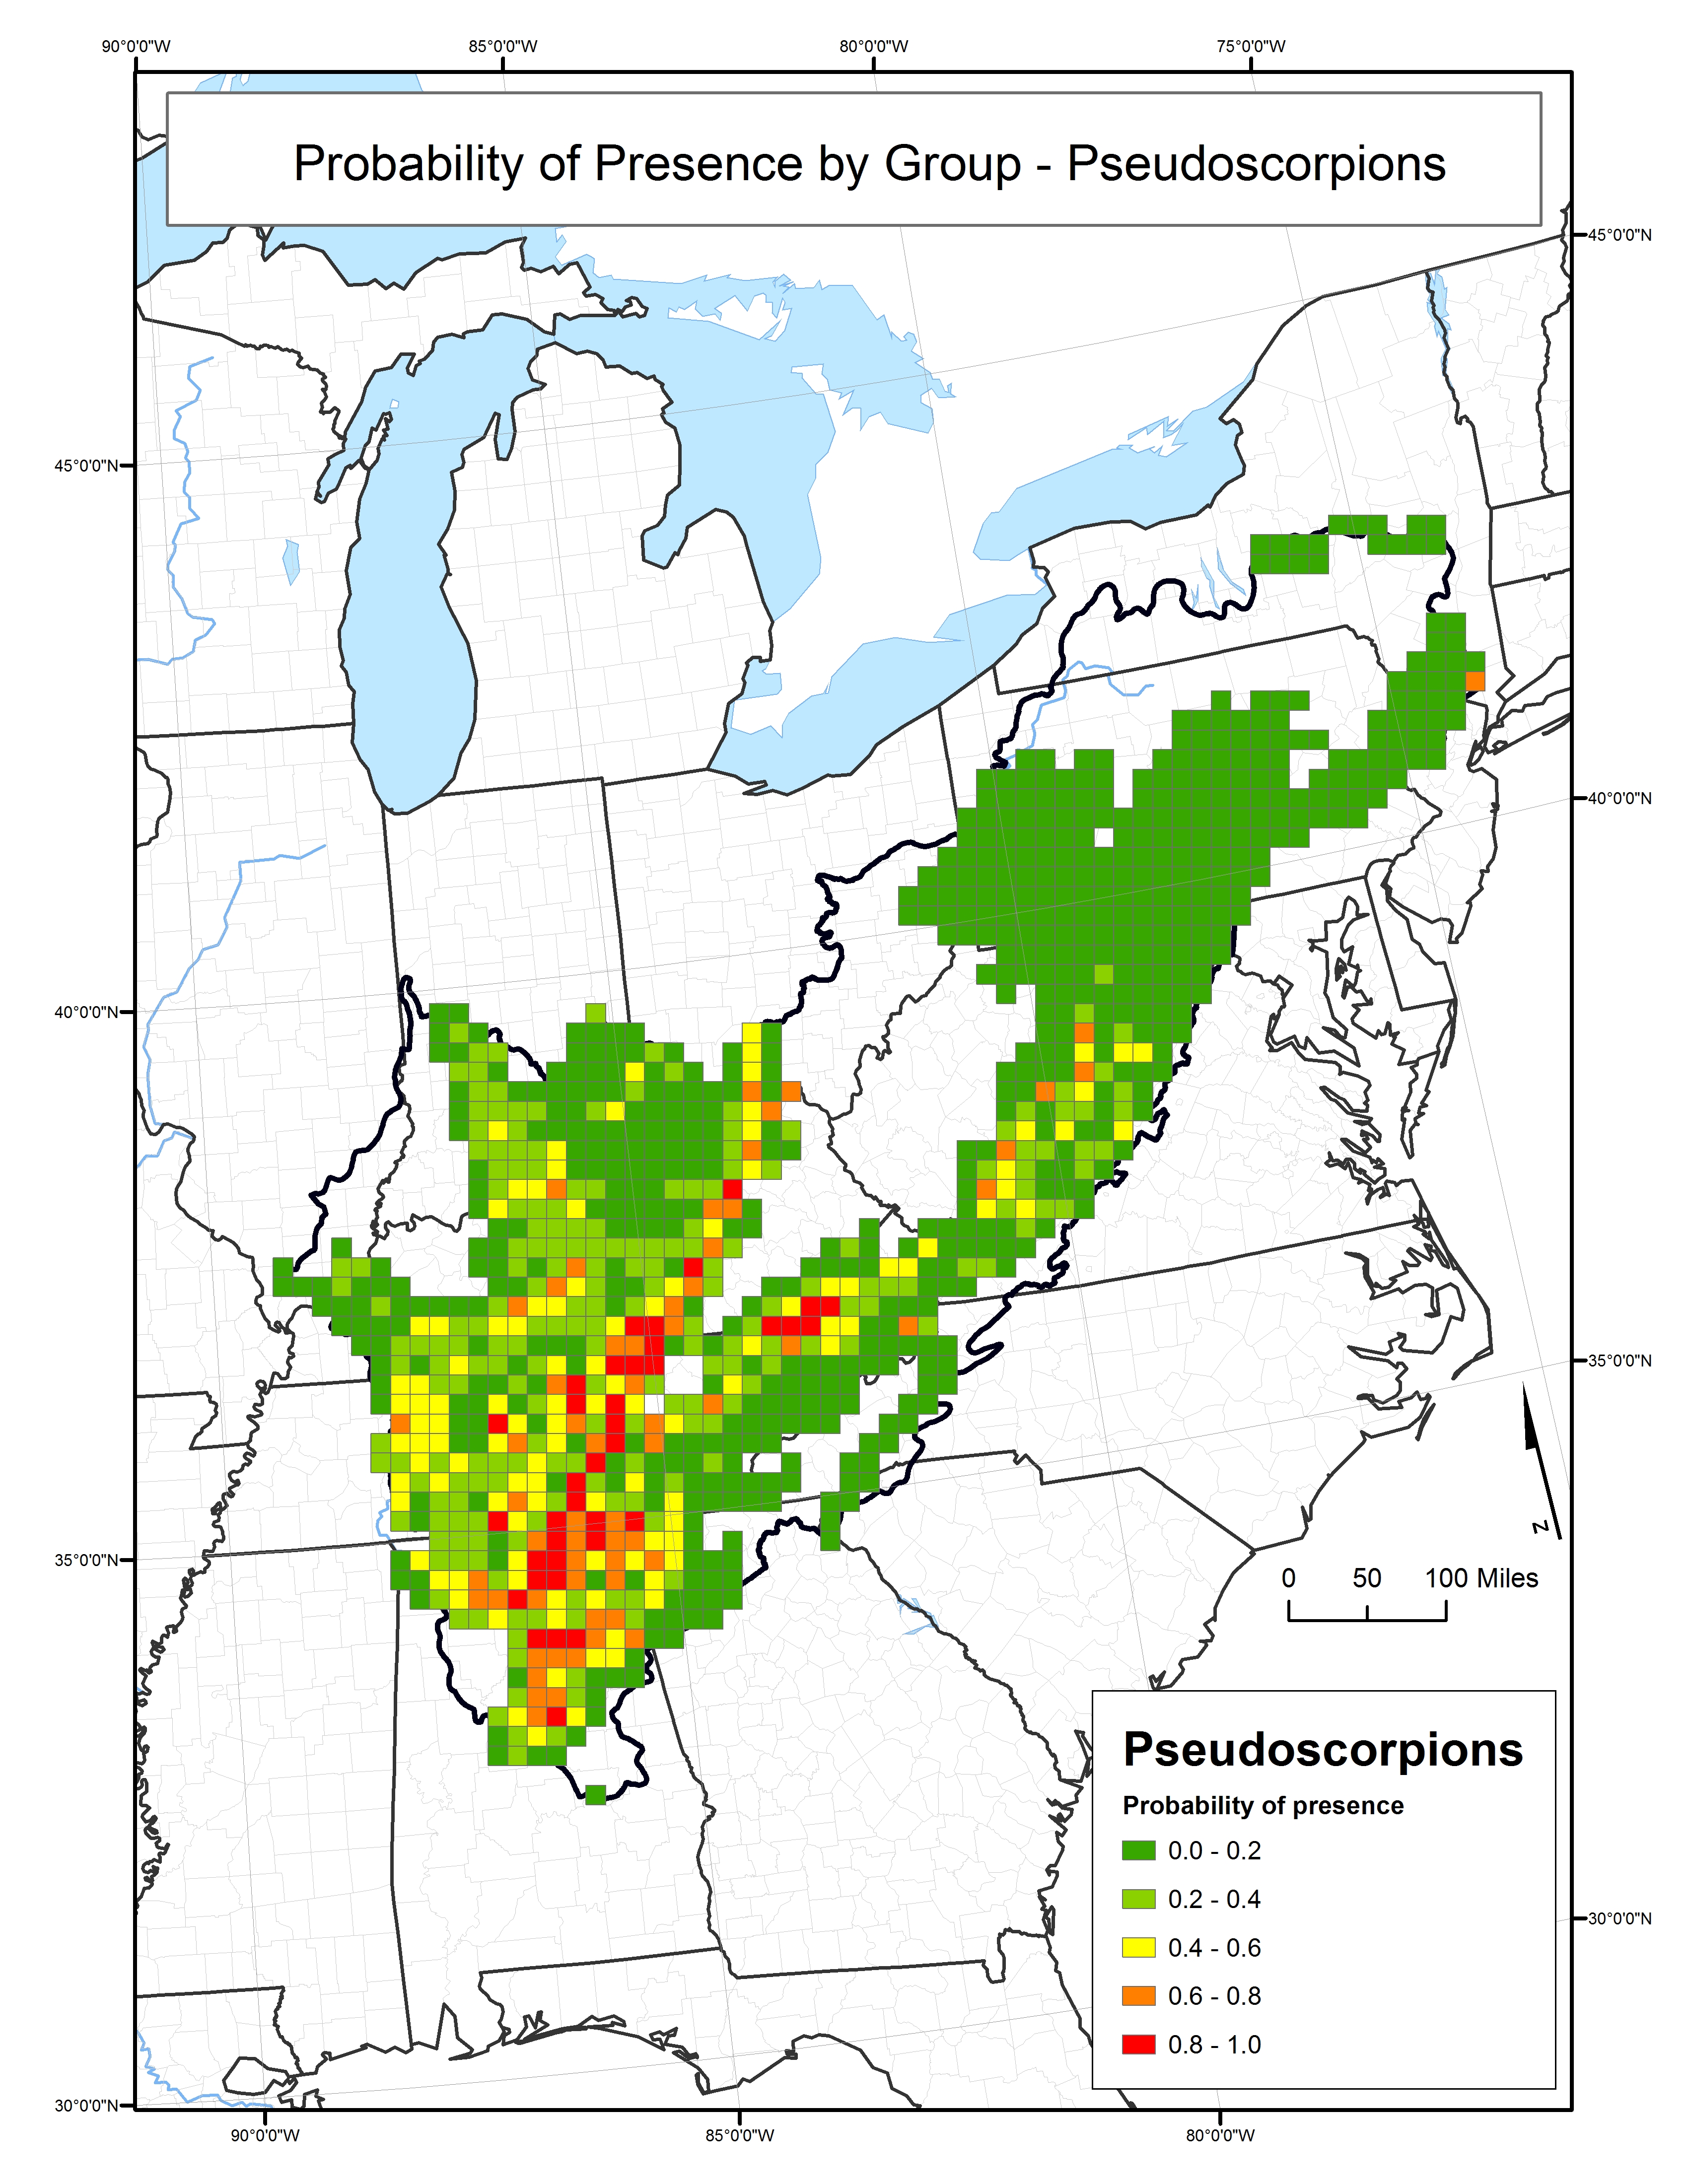 Probability of Presence for Pseudoscorpions